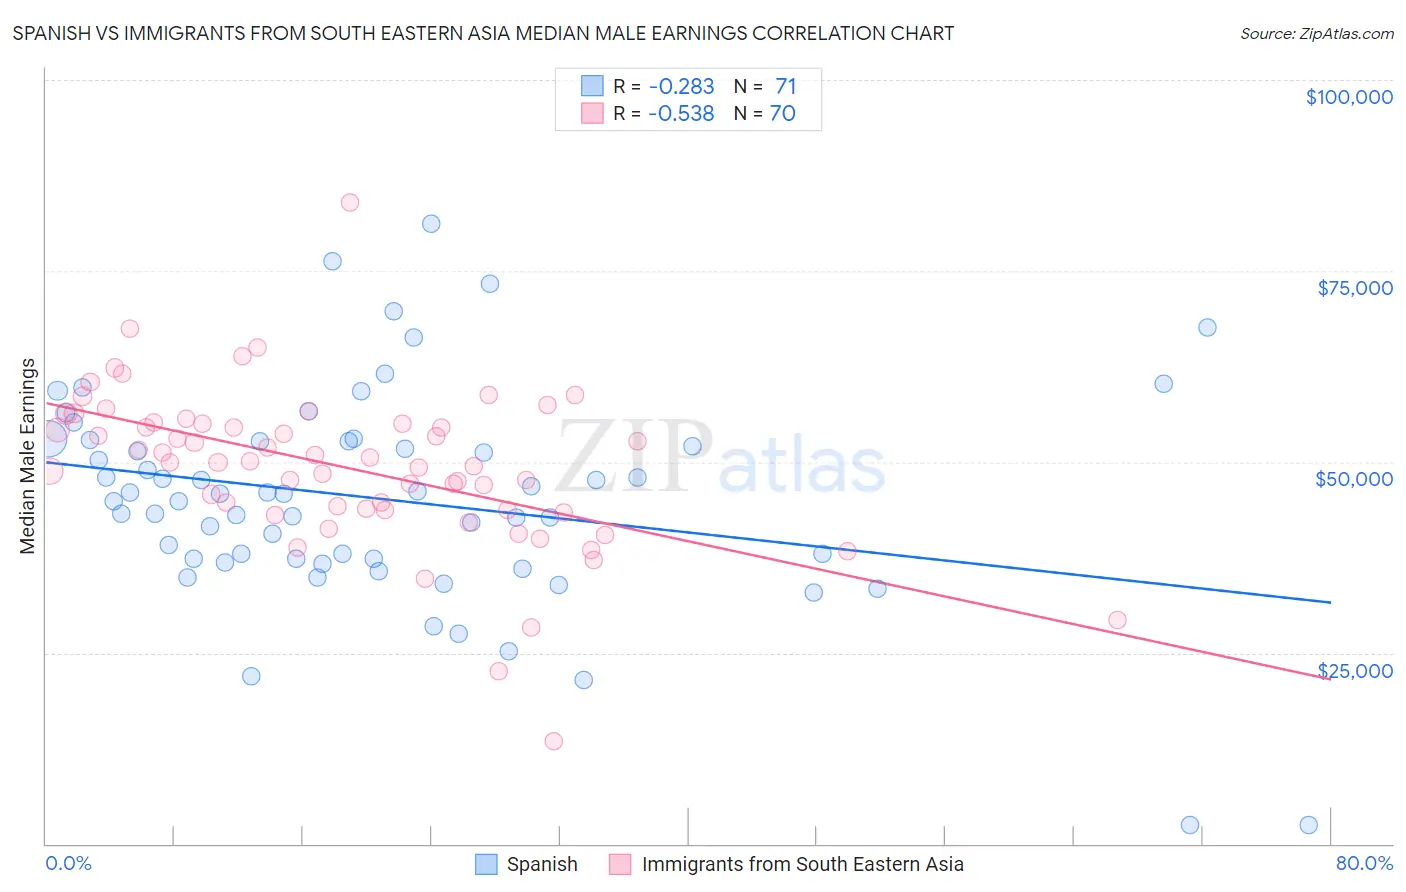 Spanish vs Immigrants from South Eastern Asia Median Male Earnings